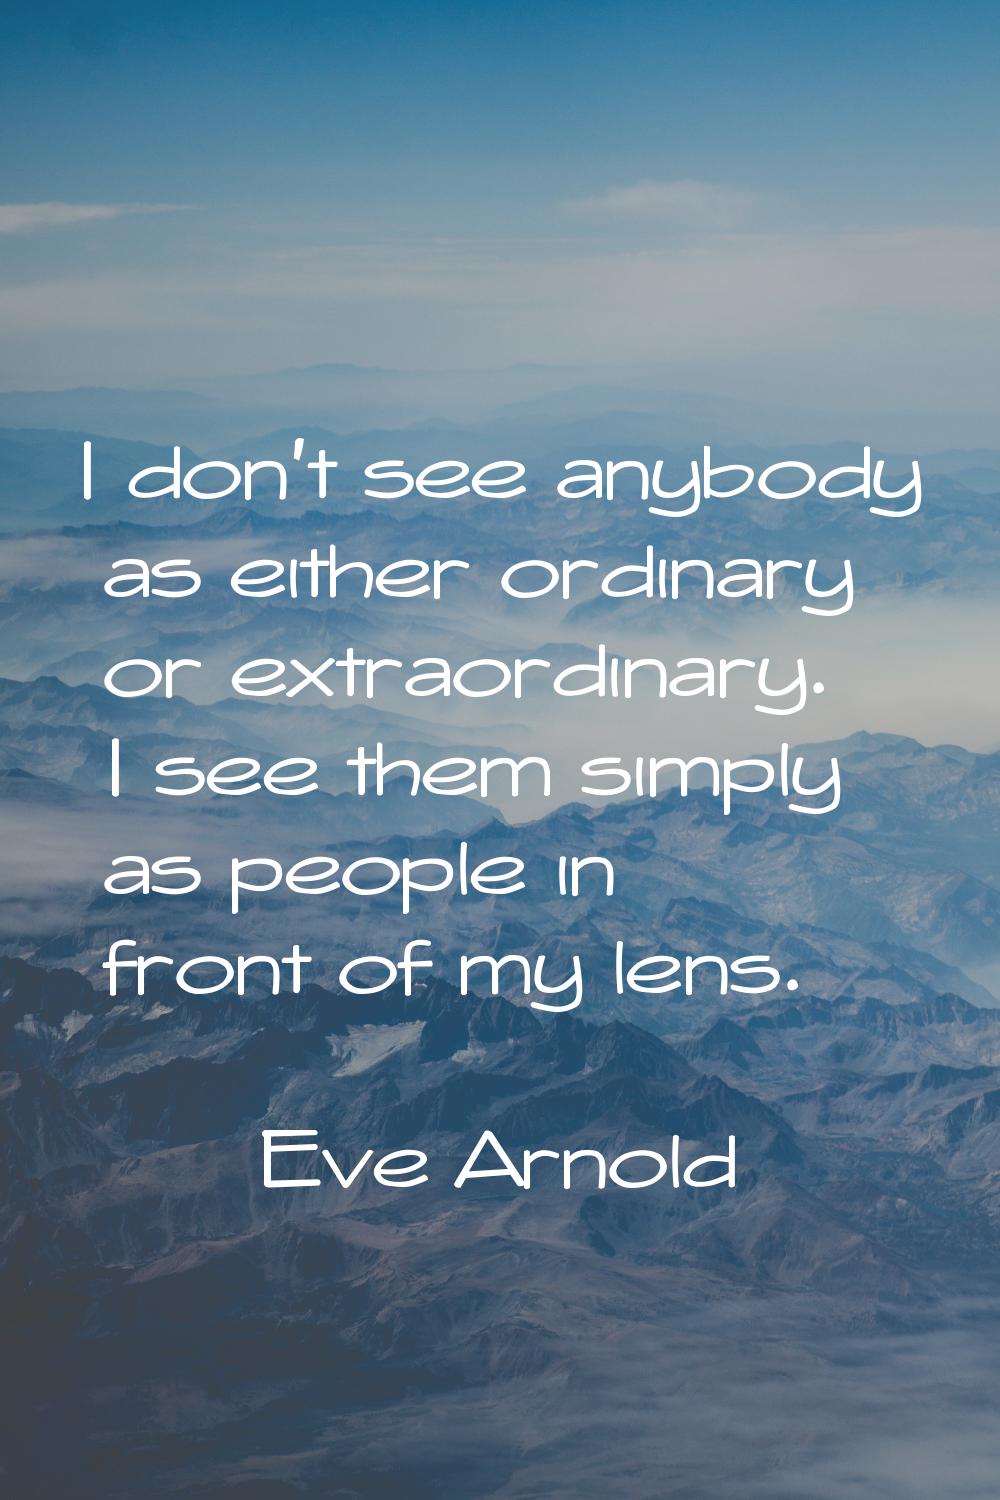 I don't see anybody as either ordinary or extraordinary. I see them simply as people in front of my